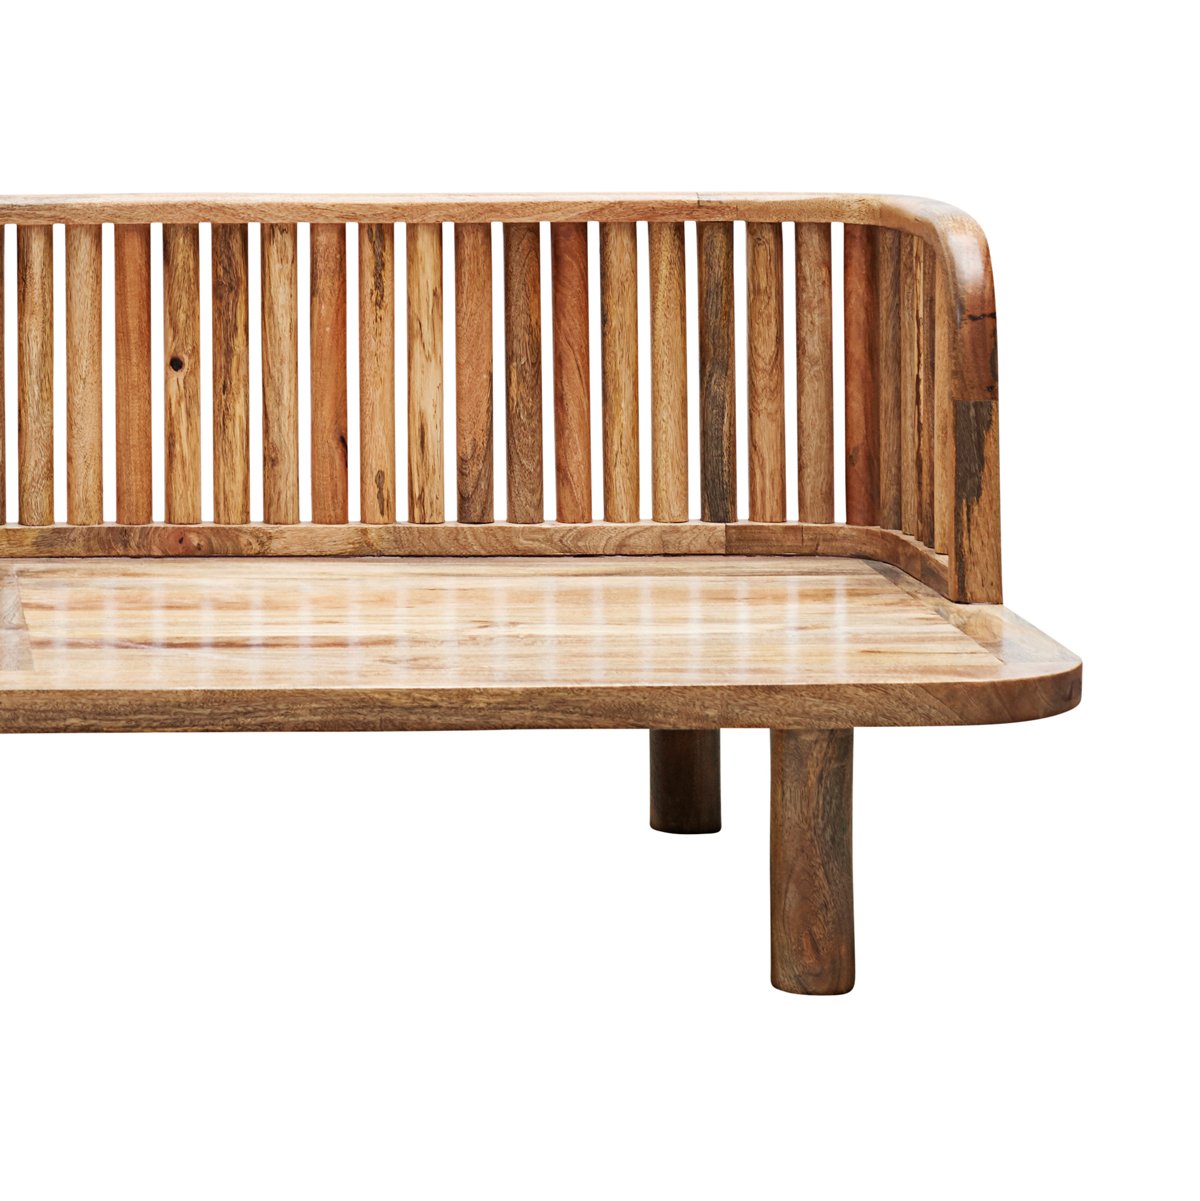 Mango wood Daybed Morena Nature House Doctor